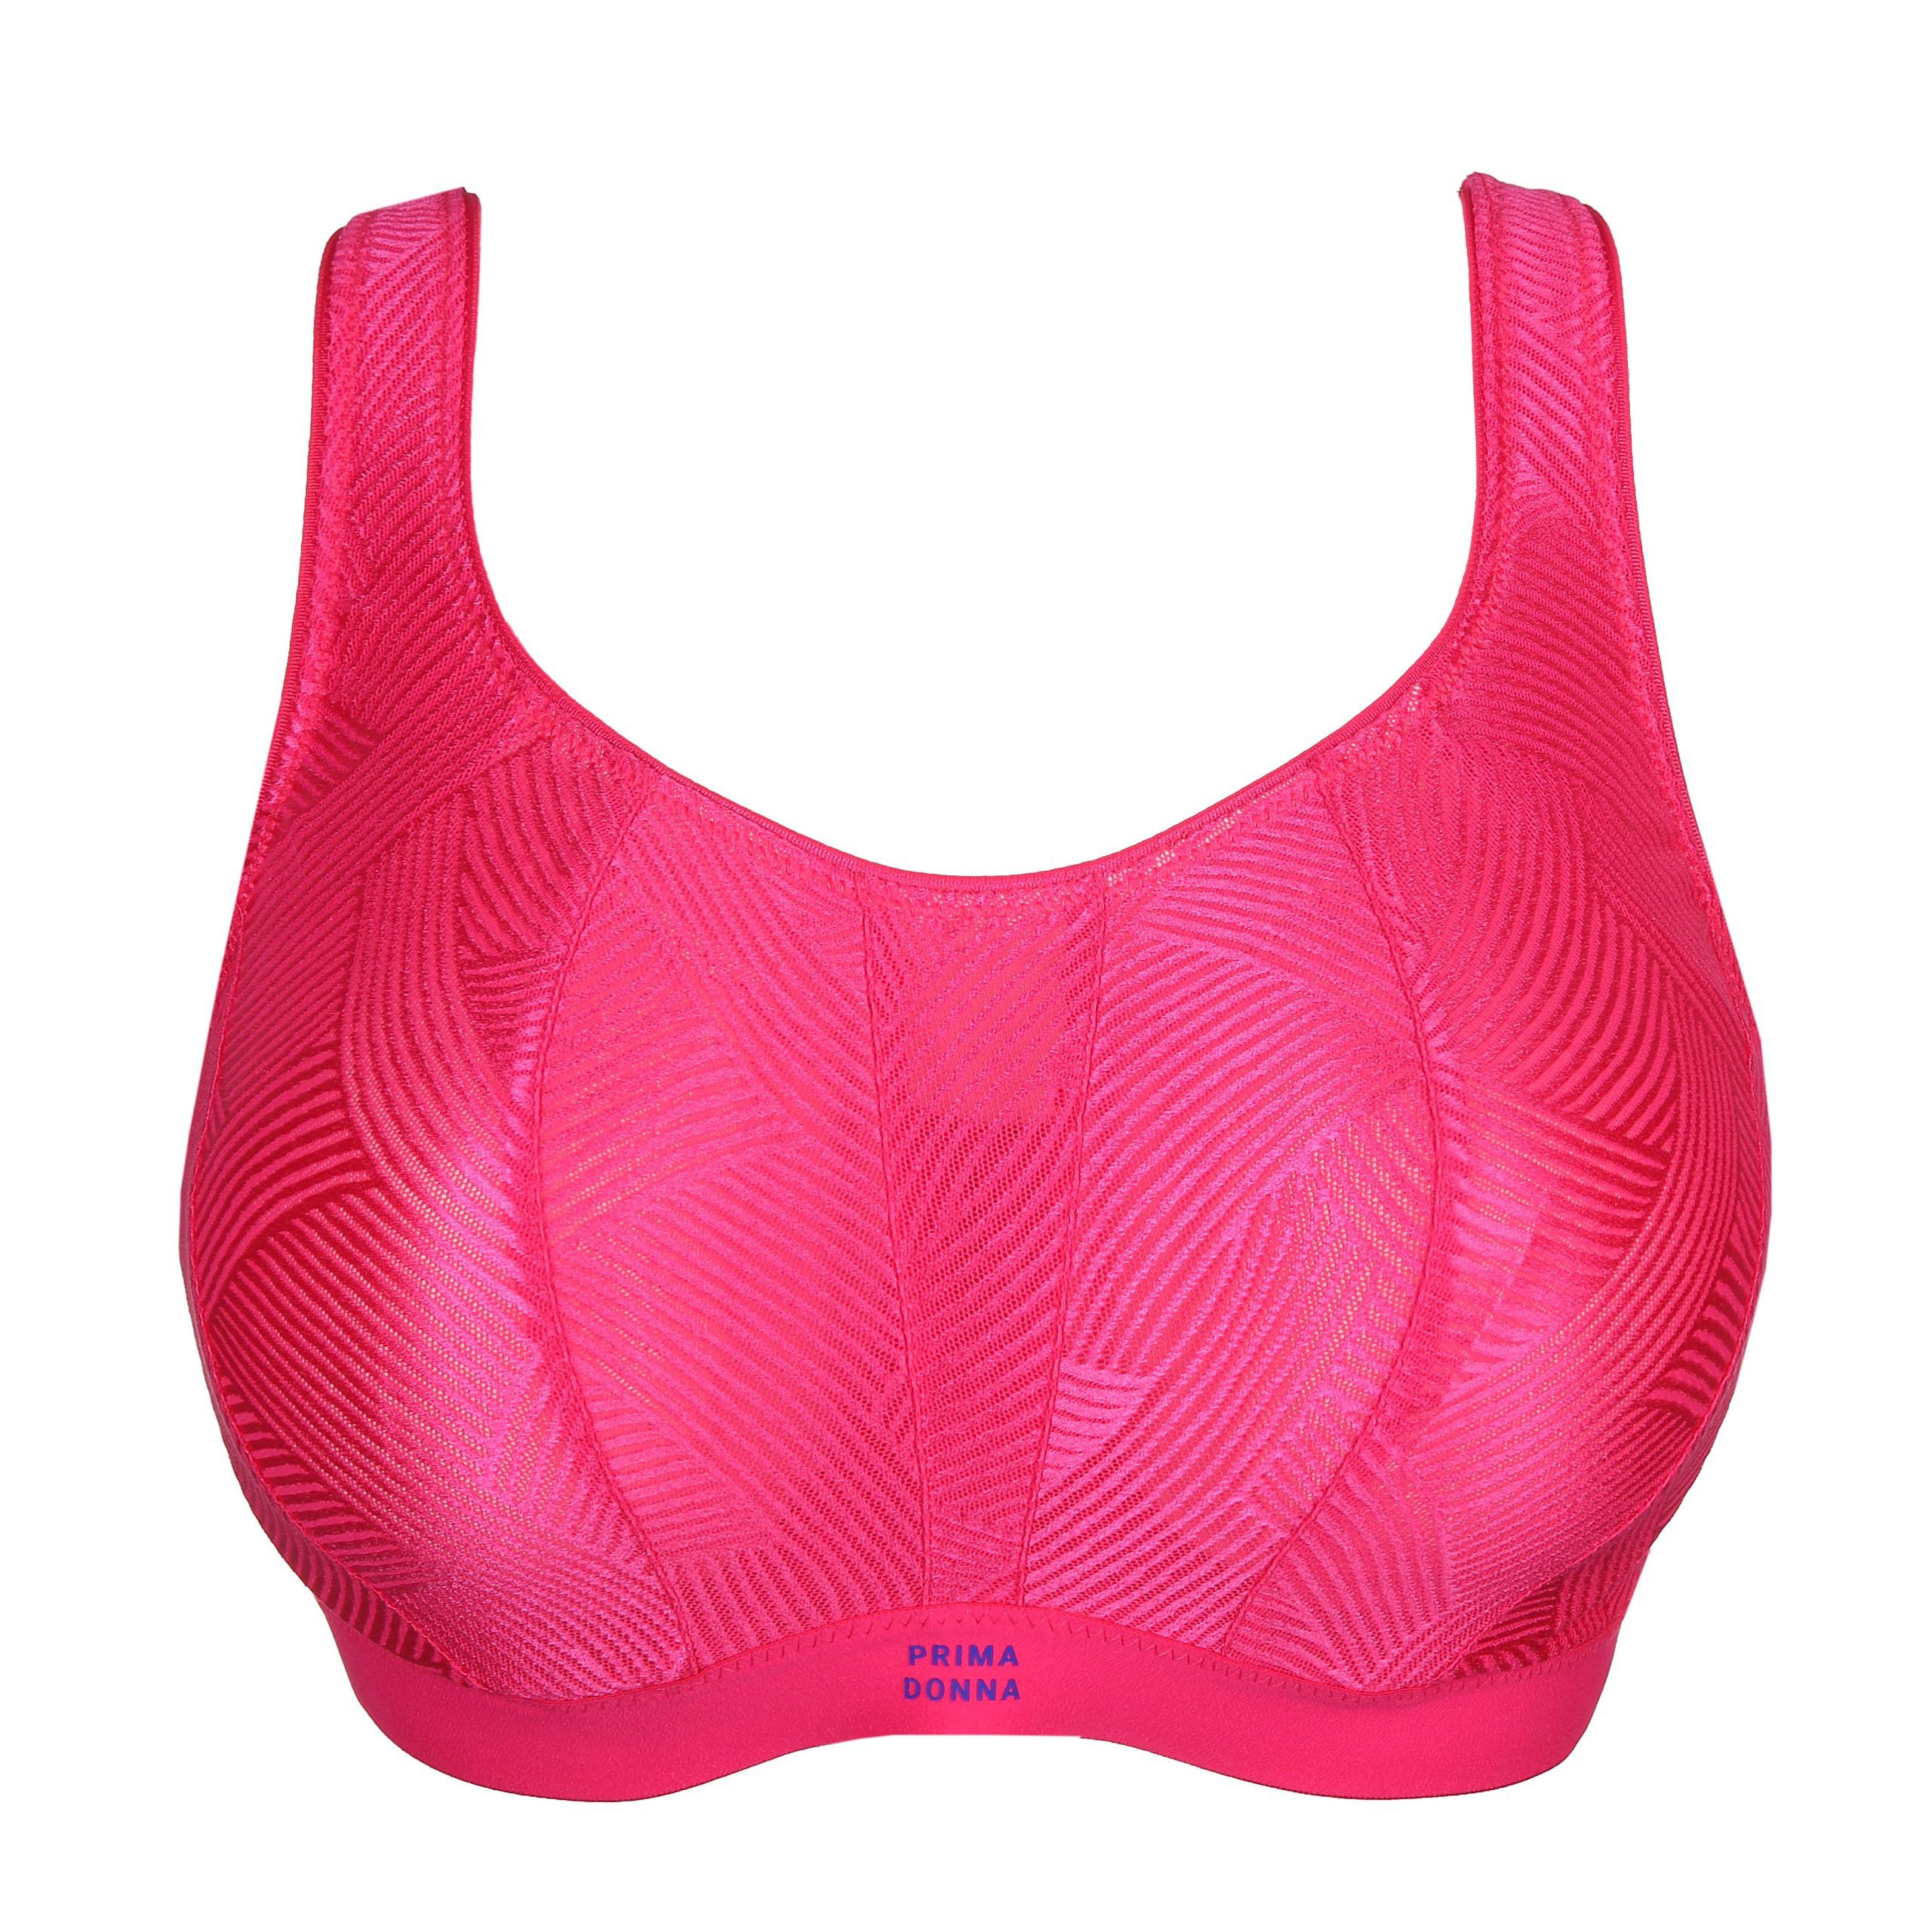 They discontinued my favorite sports bra at Soma! (36DD) This has